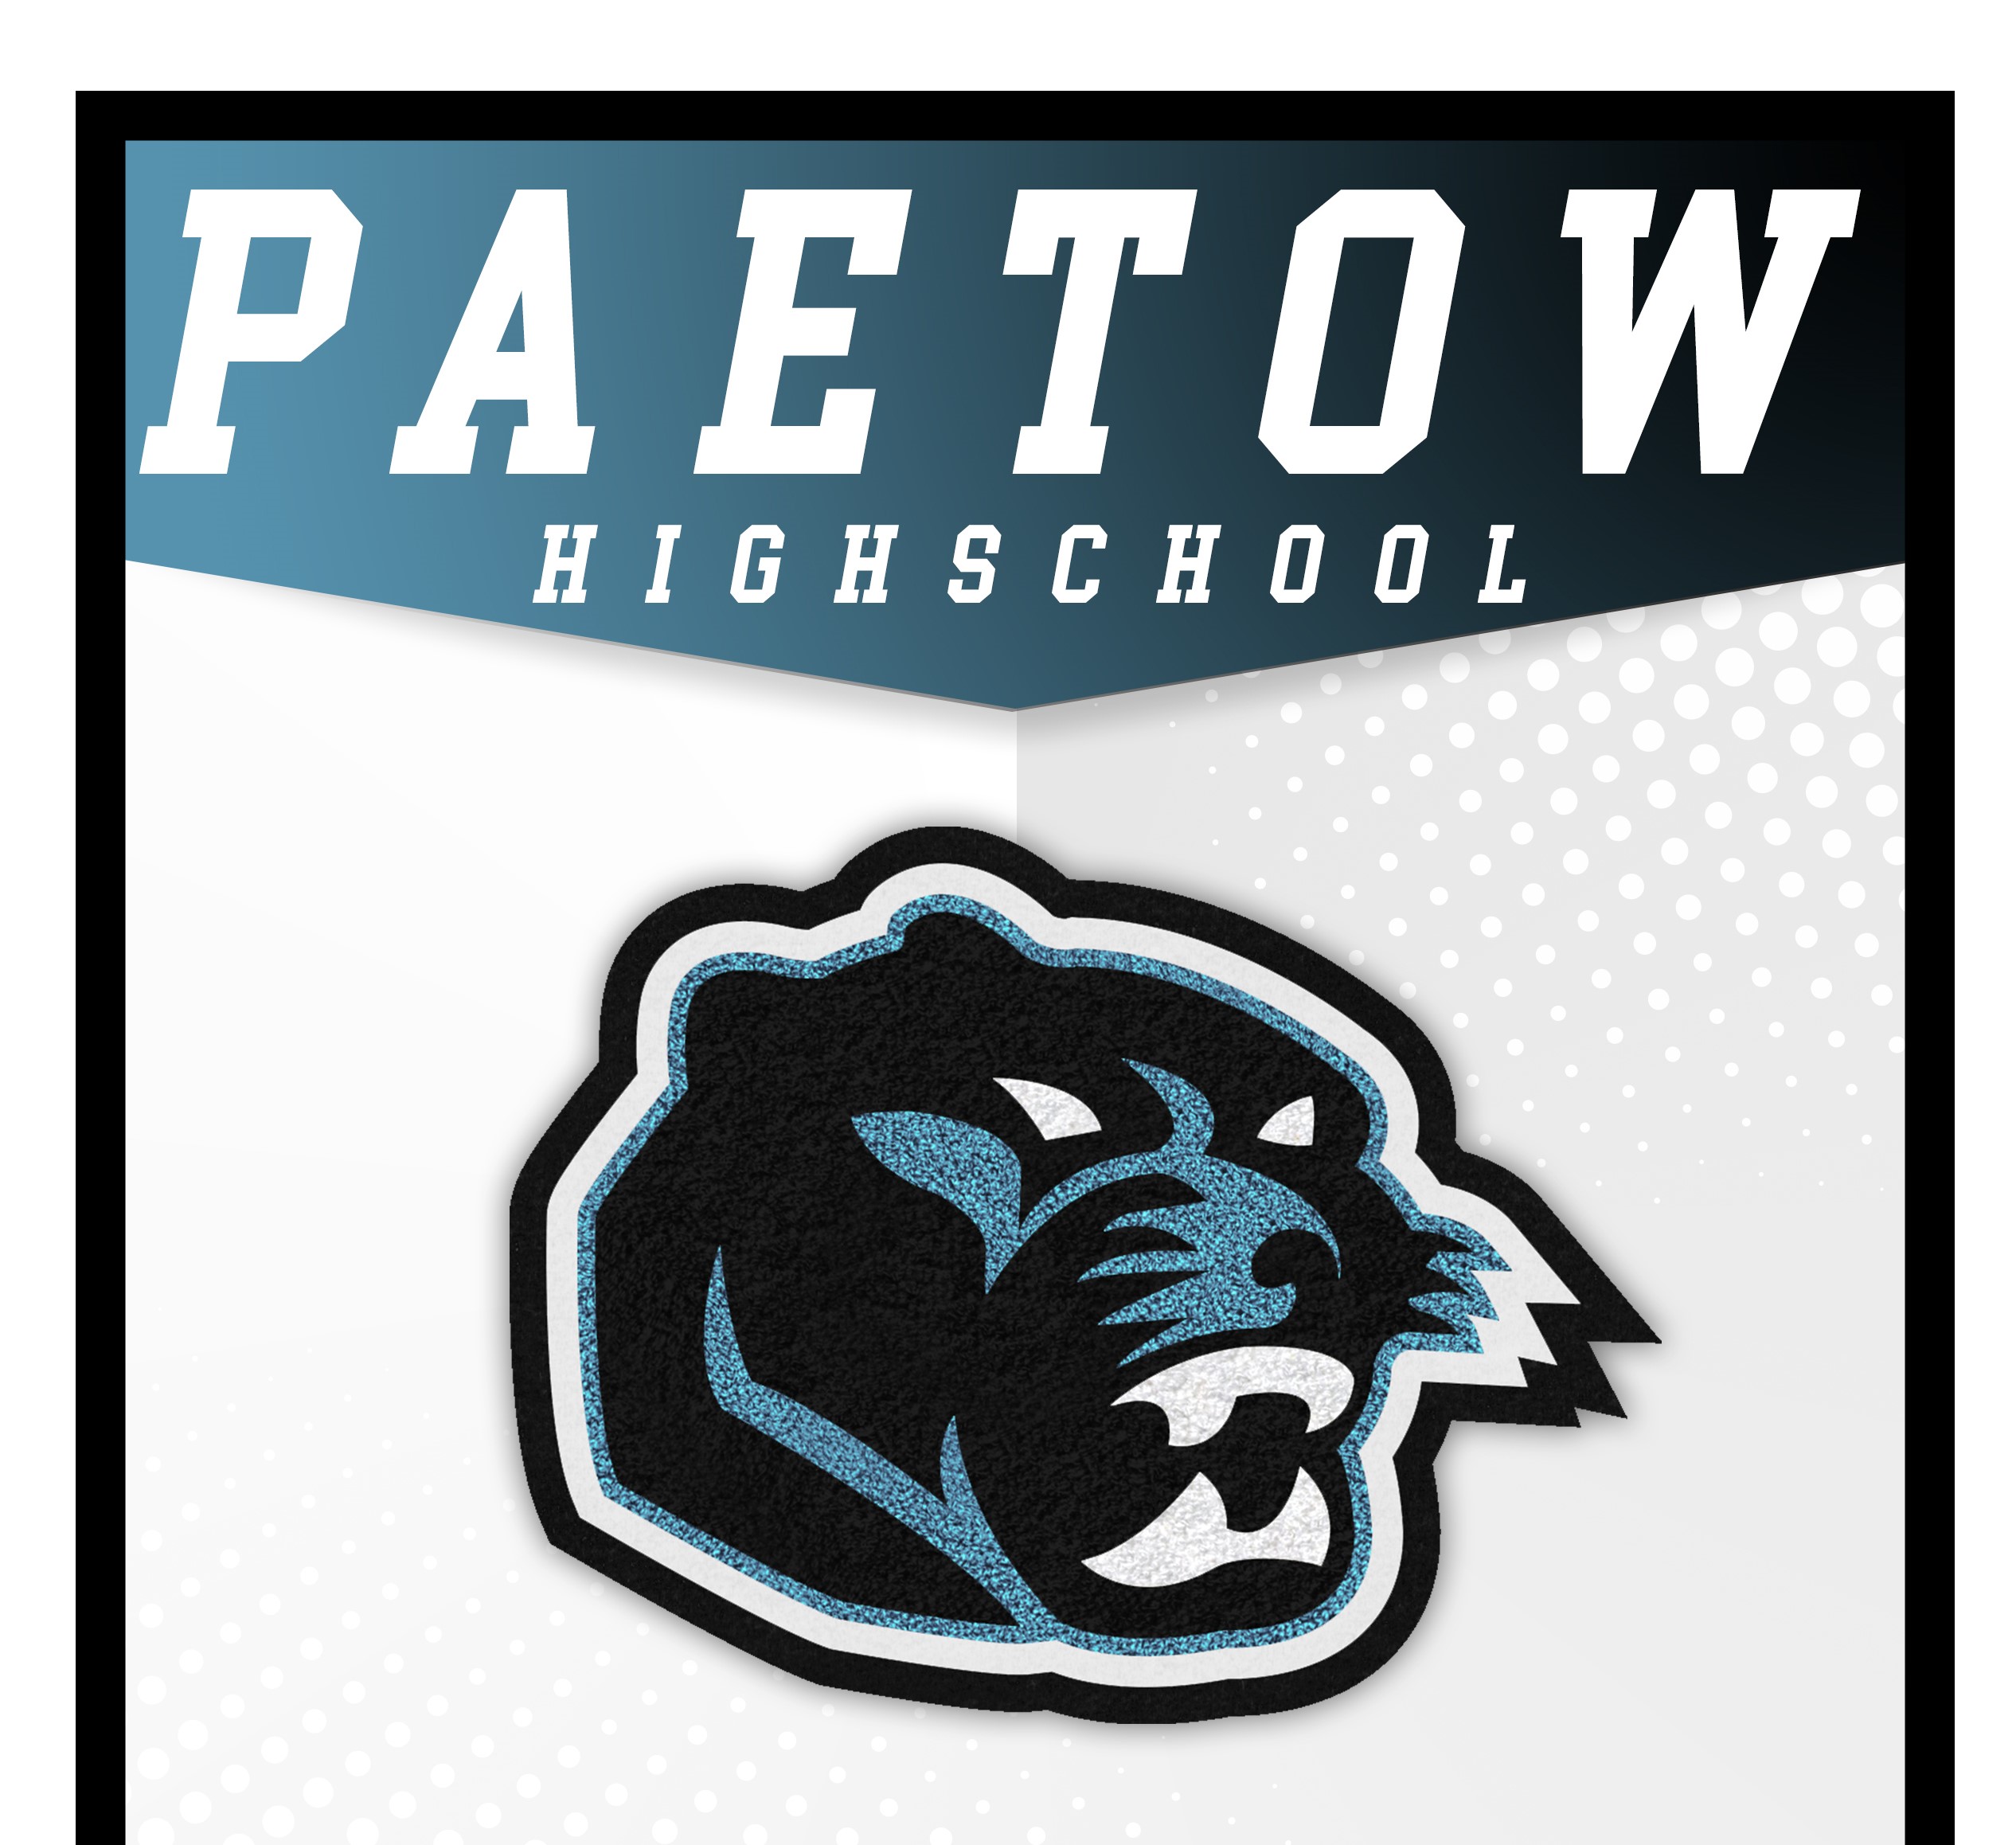 Paetow High School – Panthers